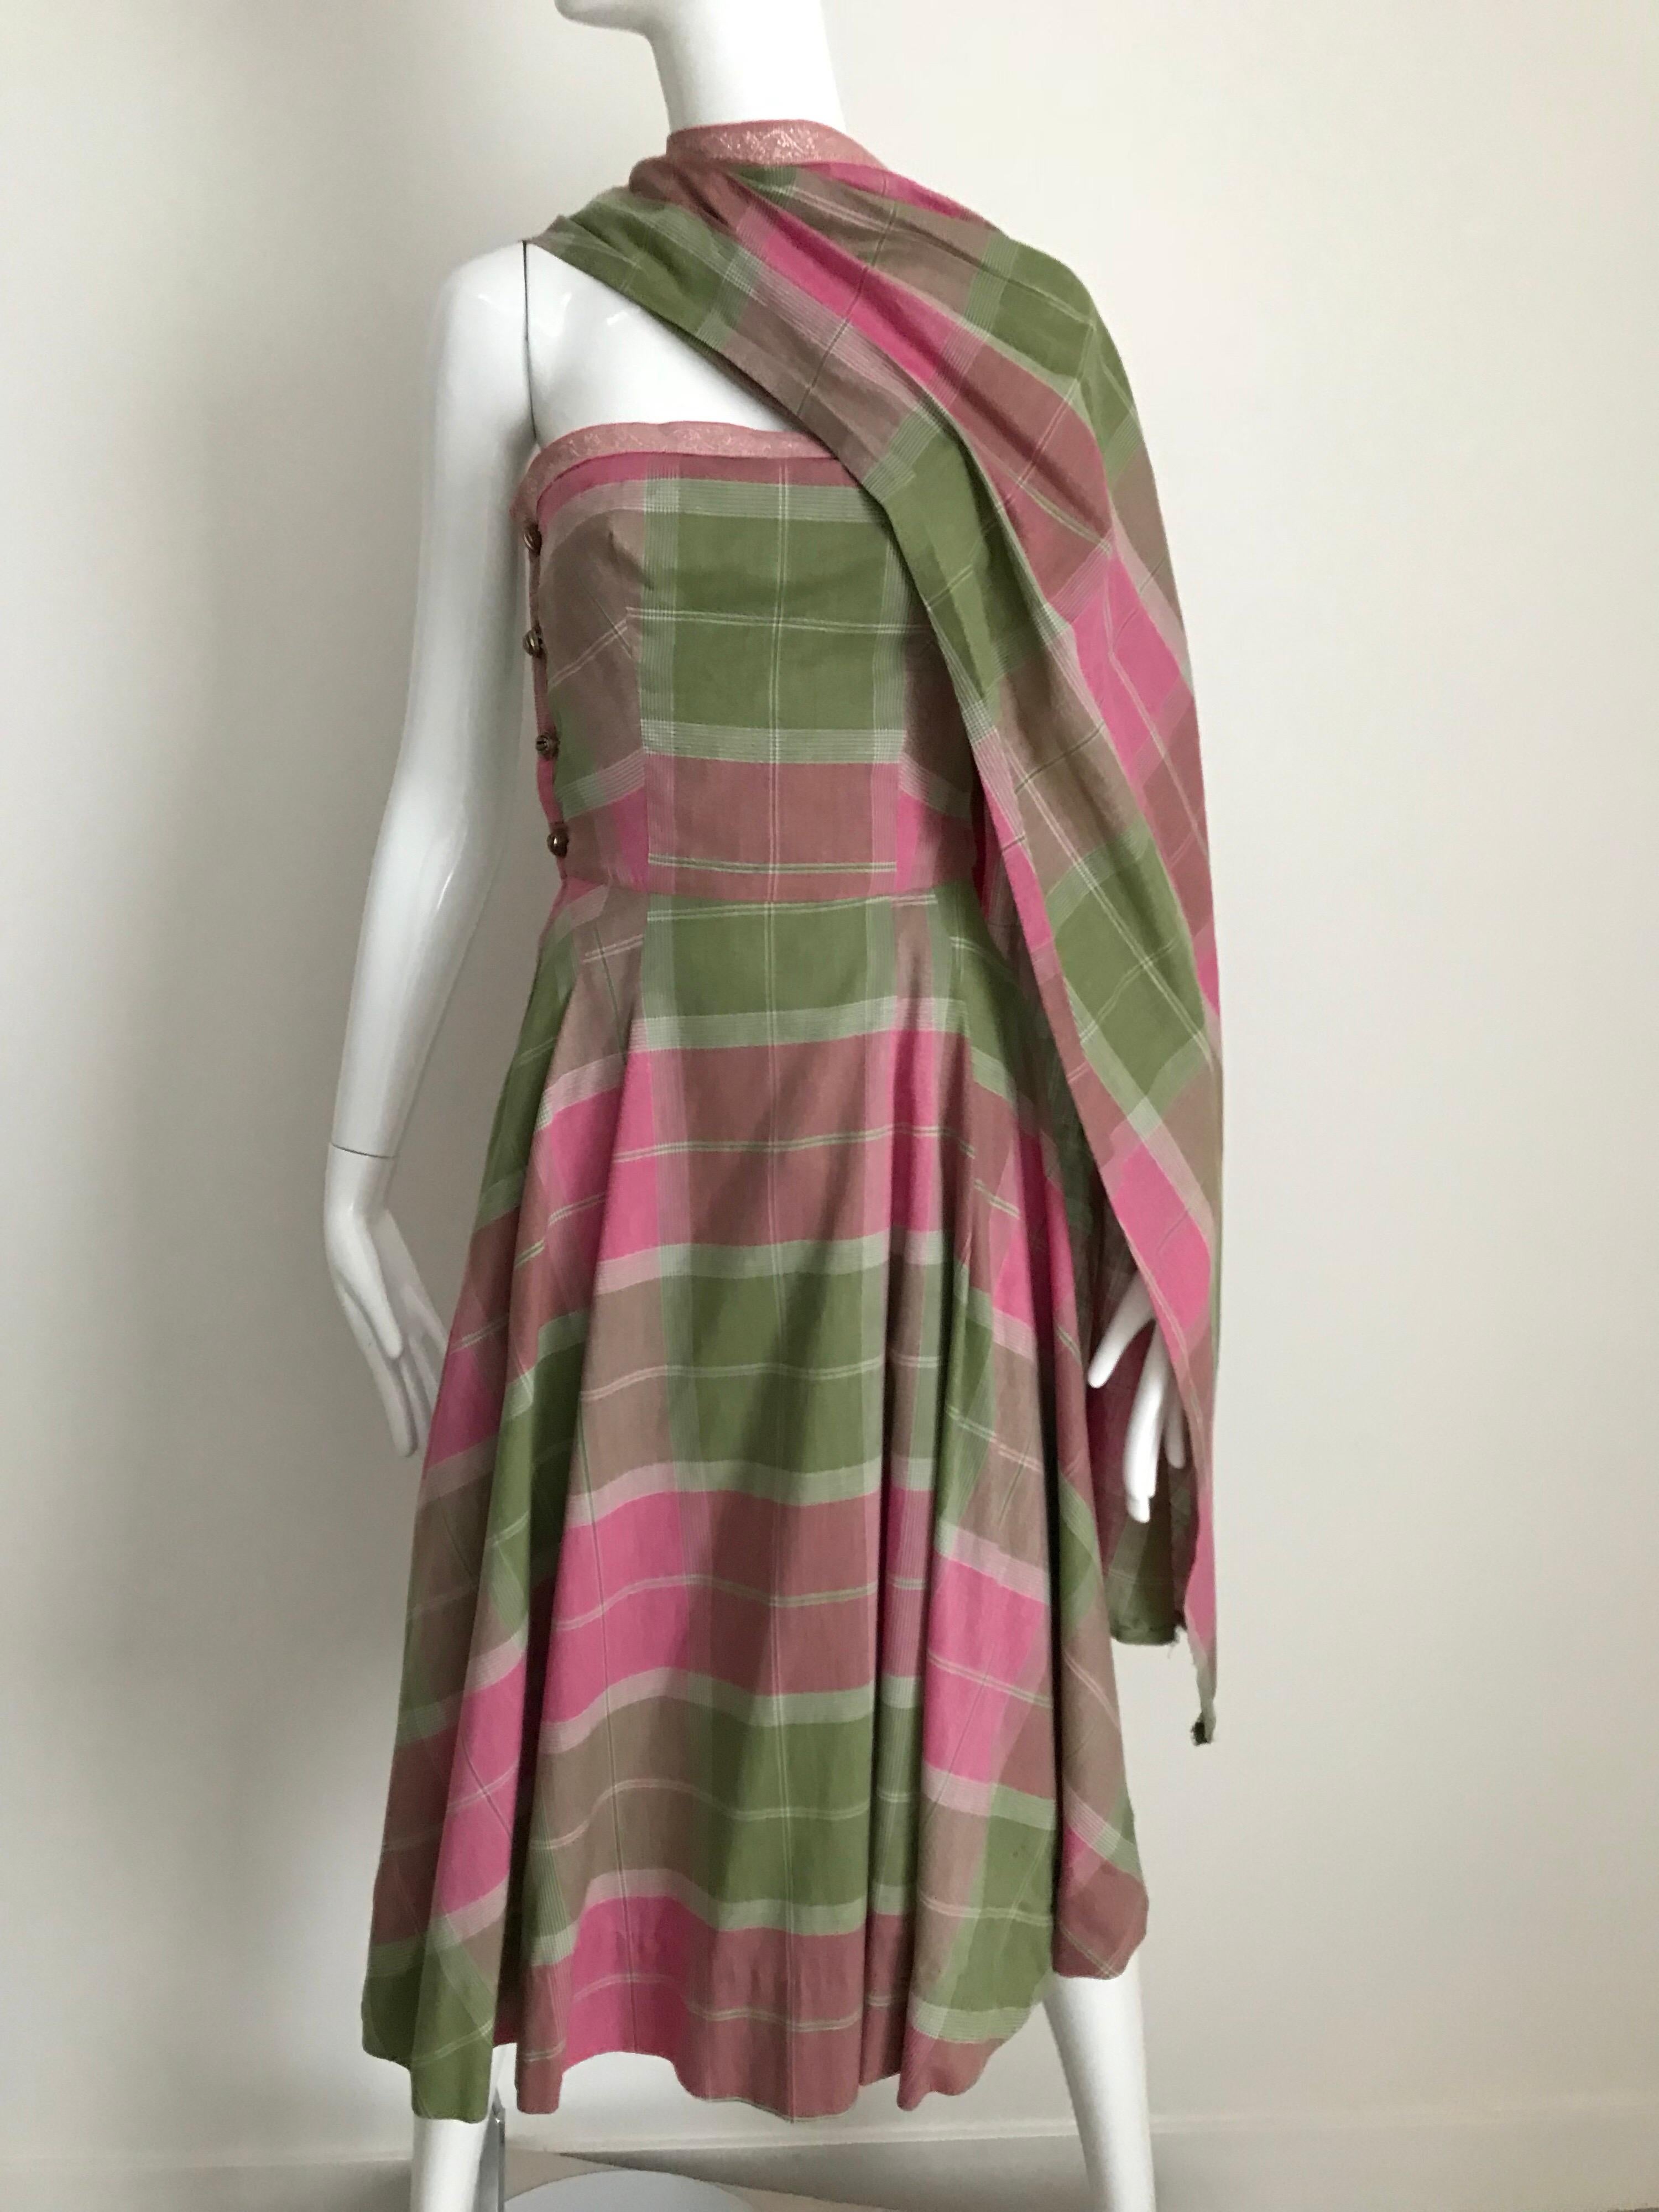 1950s Tina Lesser pink and green plaid cotton strapless dress with shawl attached.
Bust: 36 inches/ Waist: 27 inches.
Belt sold separately
**** This Garment has been professionally Dry Cleaned and Ready to wear.